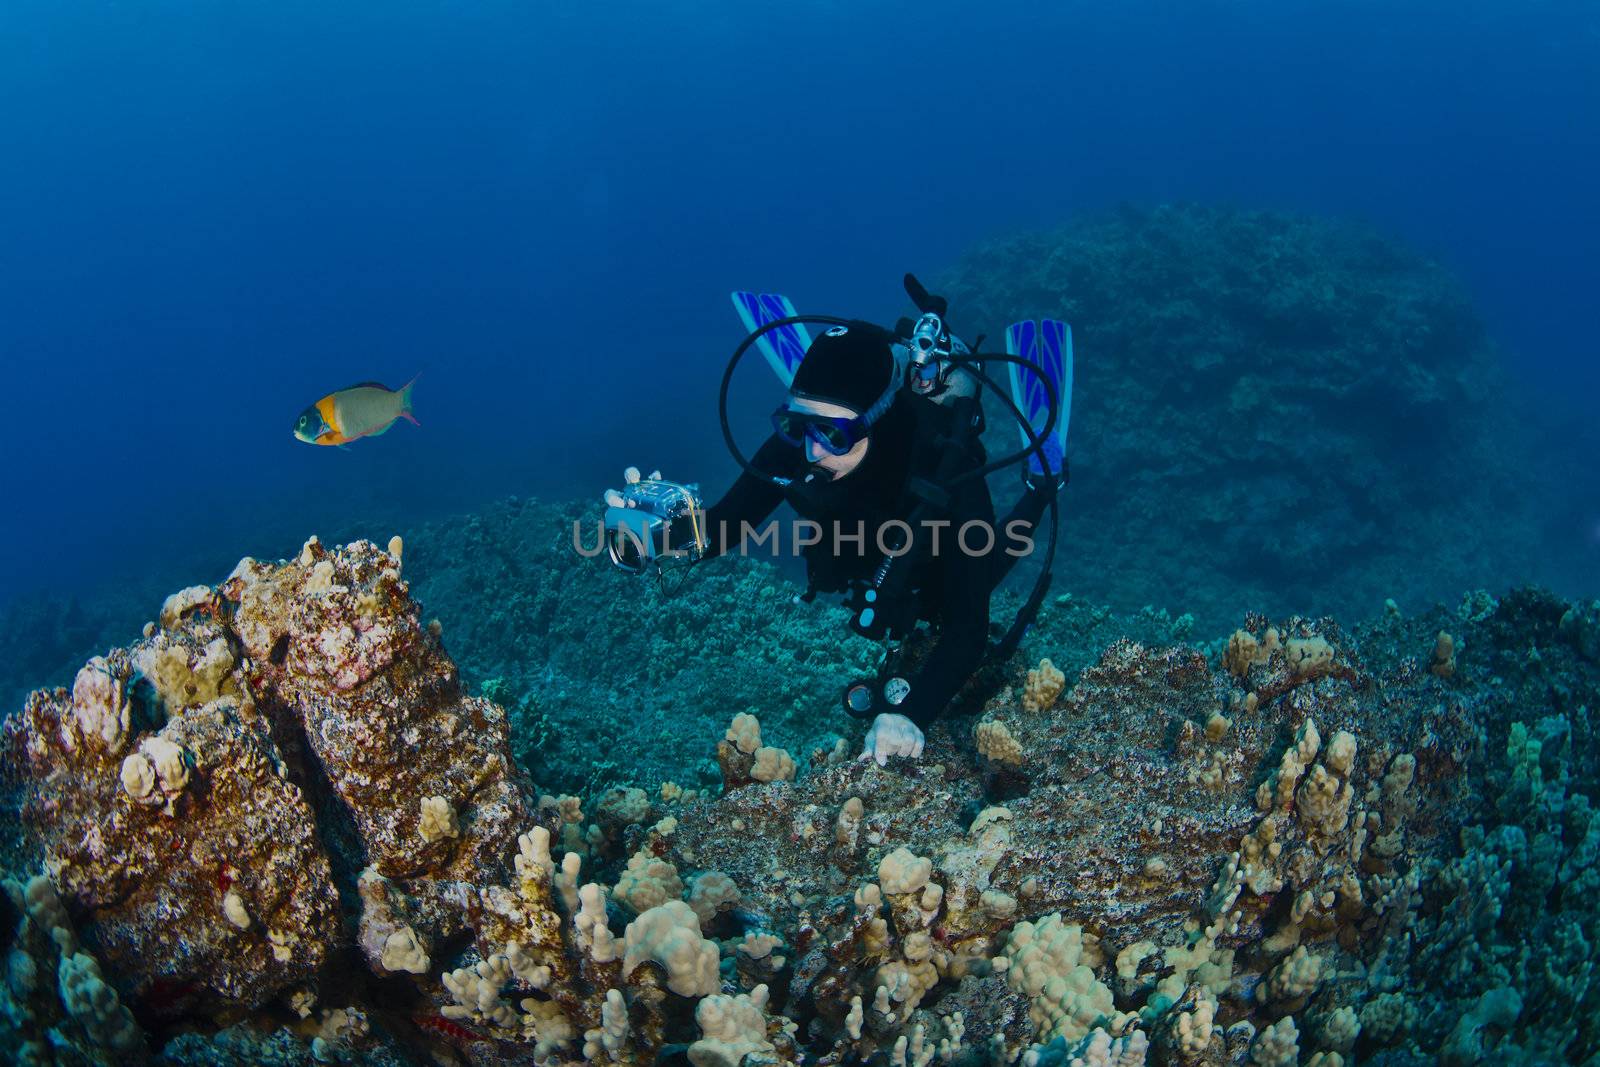 Scuba Diver taking a shot of the Reef by KevinPanizza